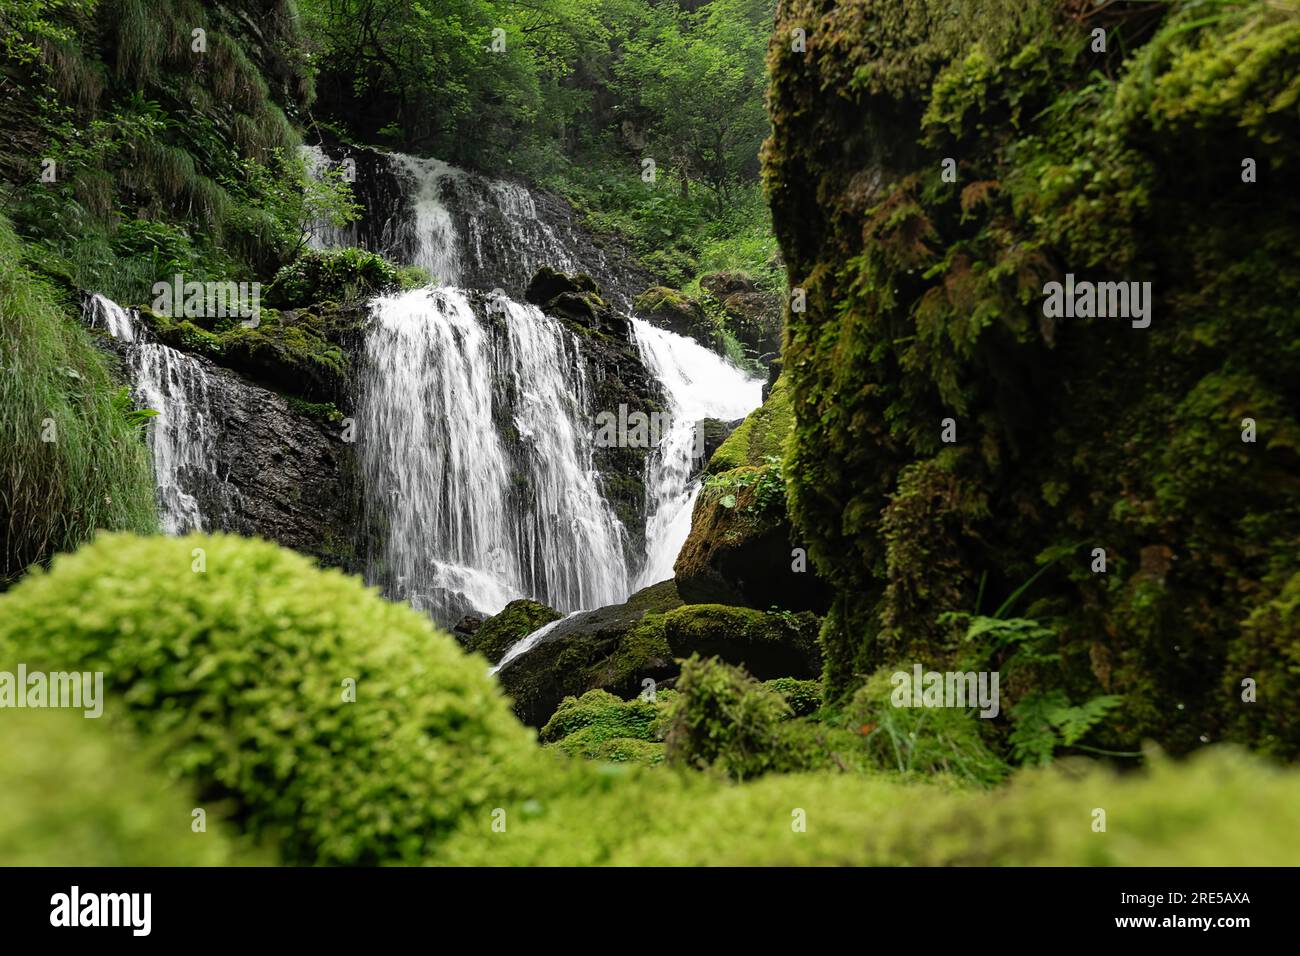 The green waterfalls, Italy landscape in the wild Alps Stock Photo